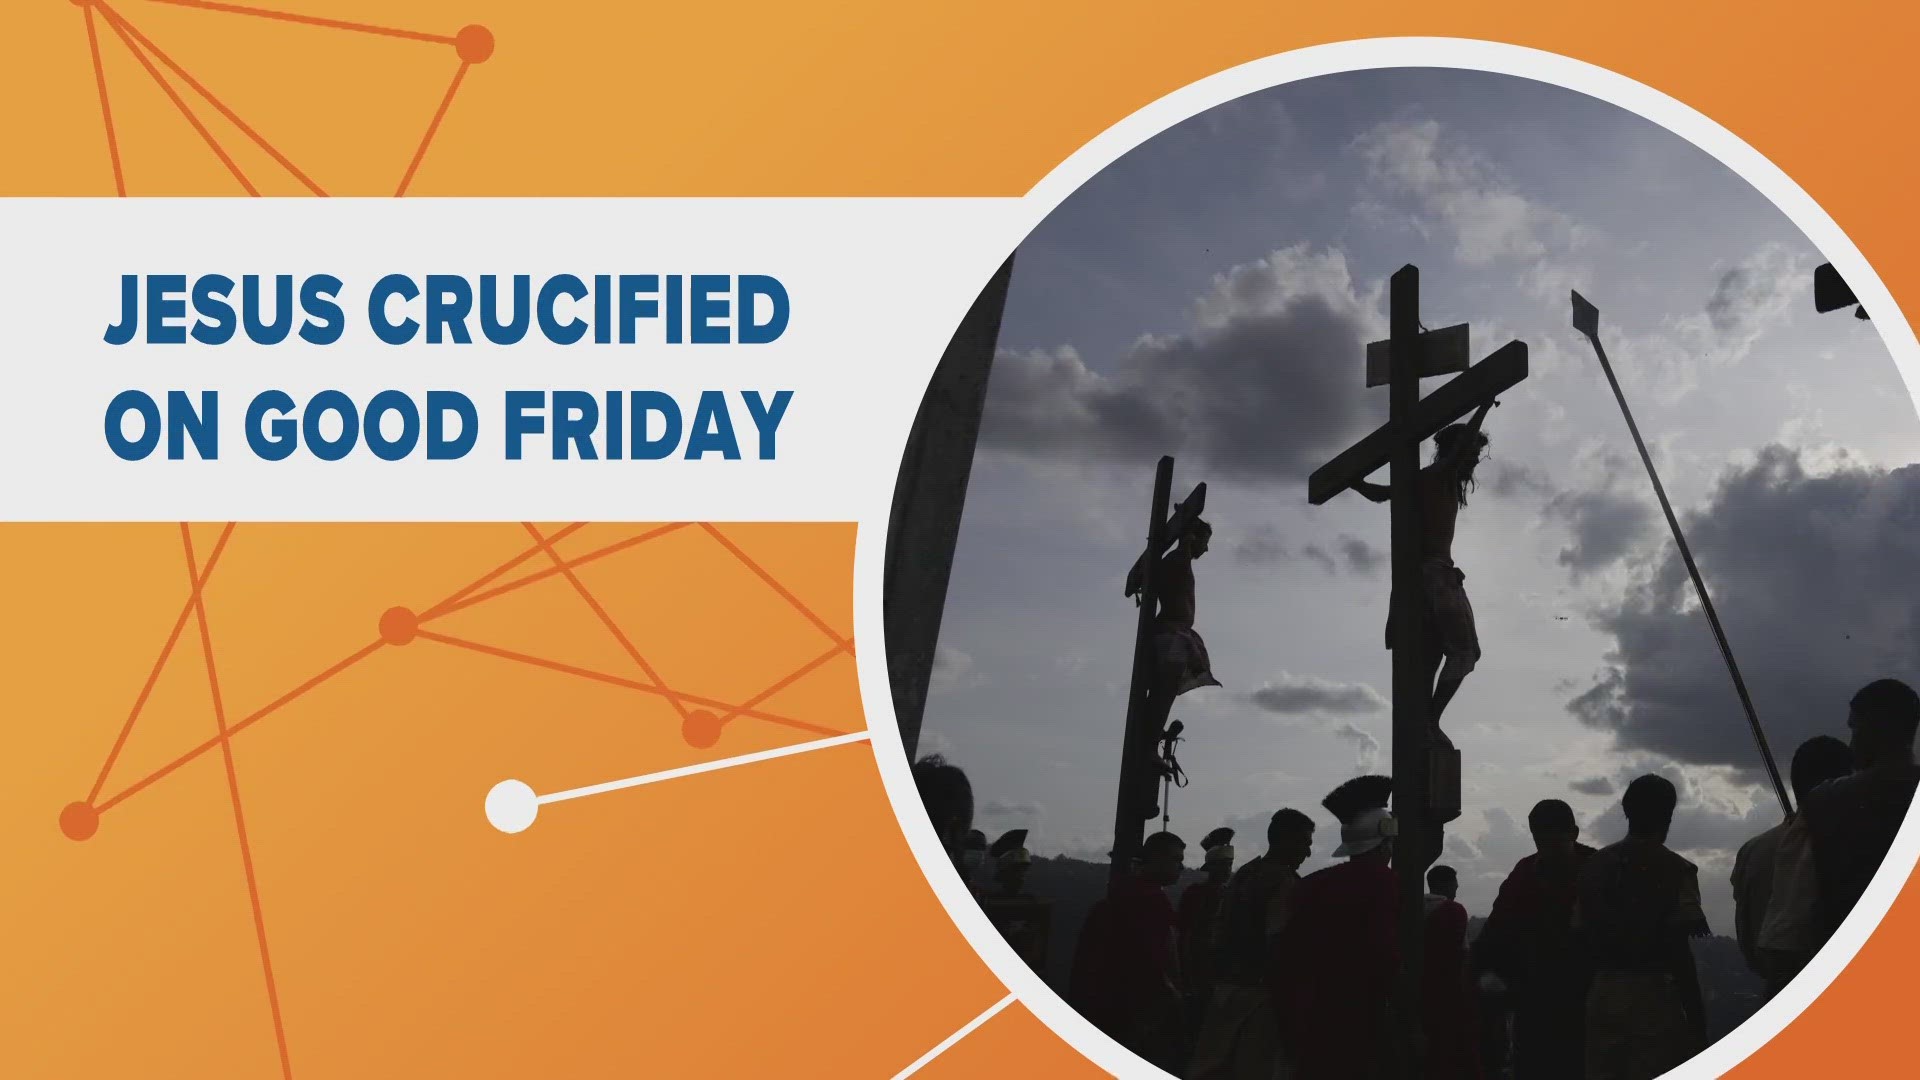 For Christians, Easter is an important day to remember the resurrection of Jesus Christ, but two days before Easter Sunday is Good Friday.